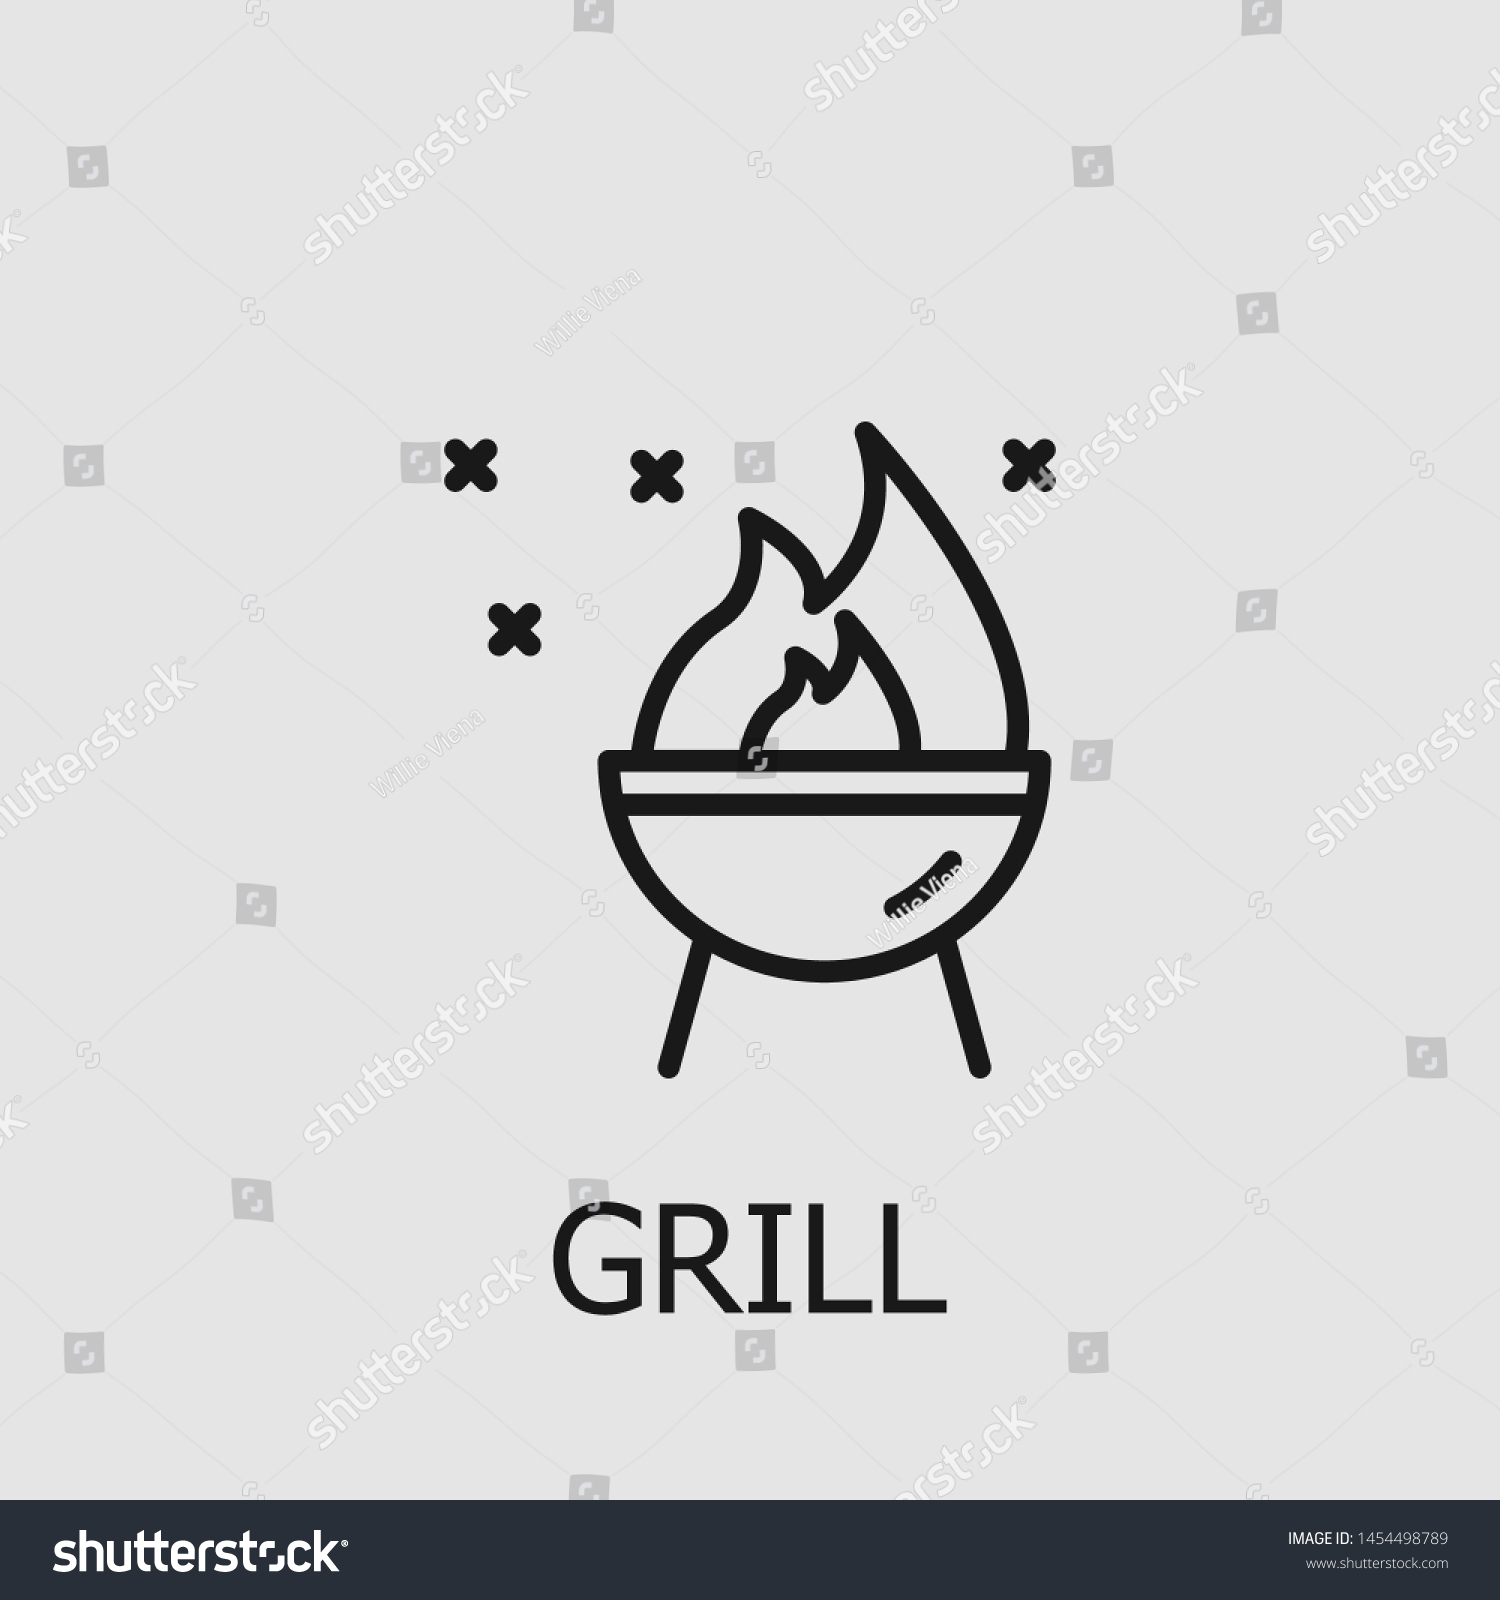 Outline Grill Vector Icon Grill Illustration Stock Vector (Royalty Free ...